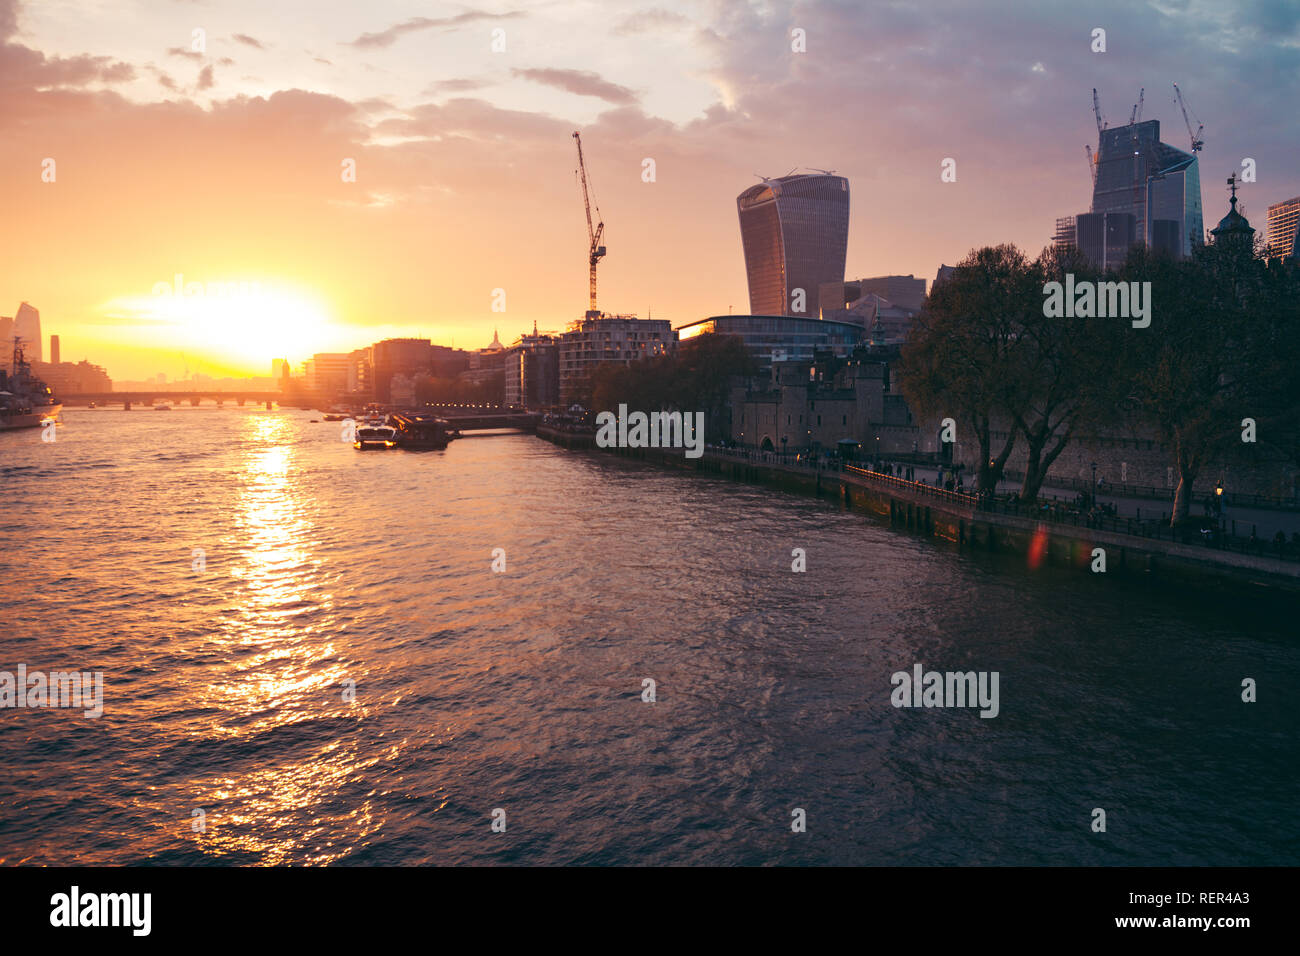 Amazing sunset over the river Thames in London Stock Photo